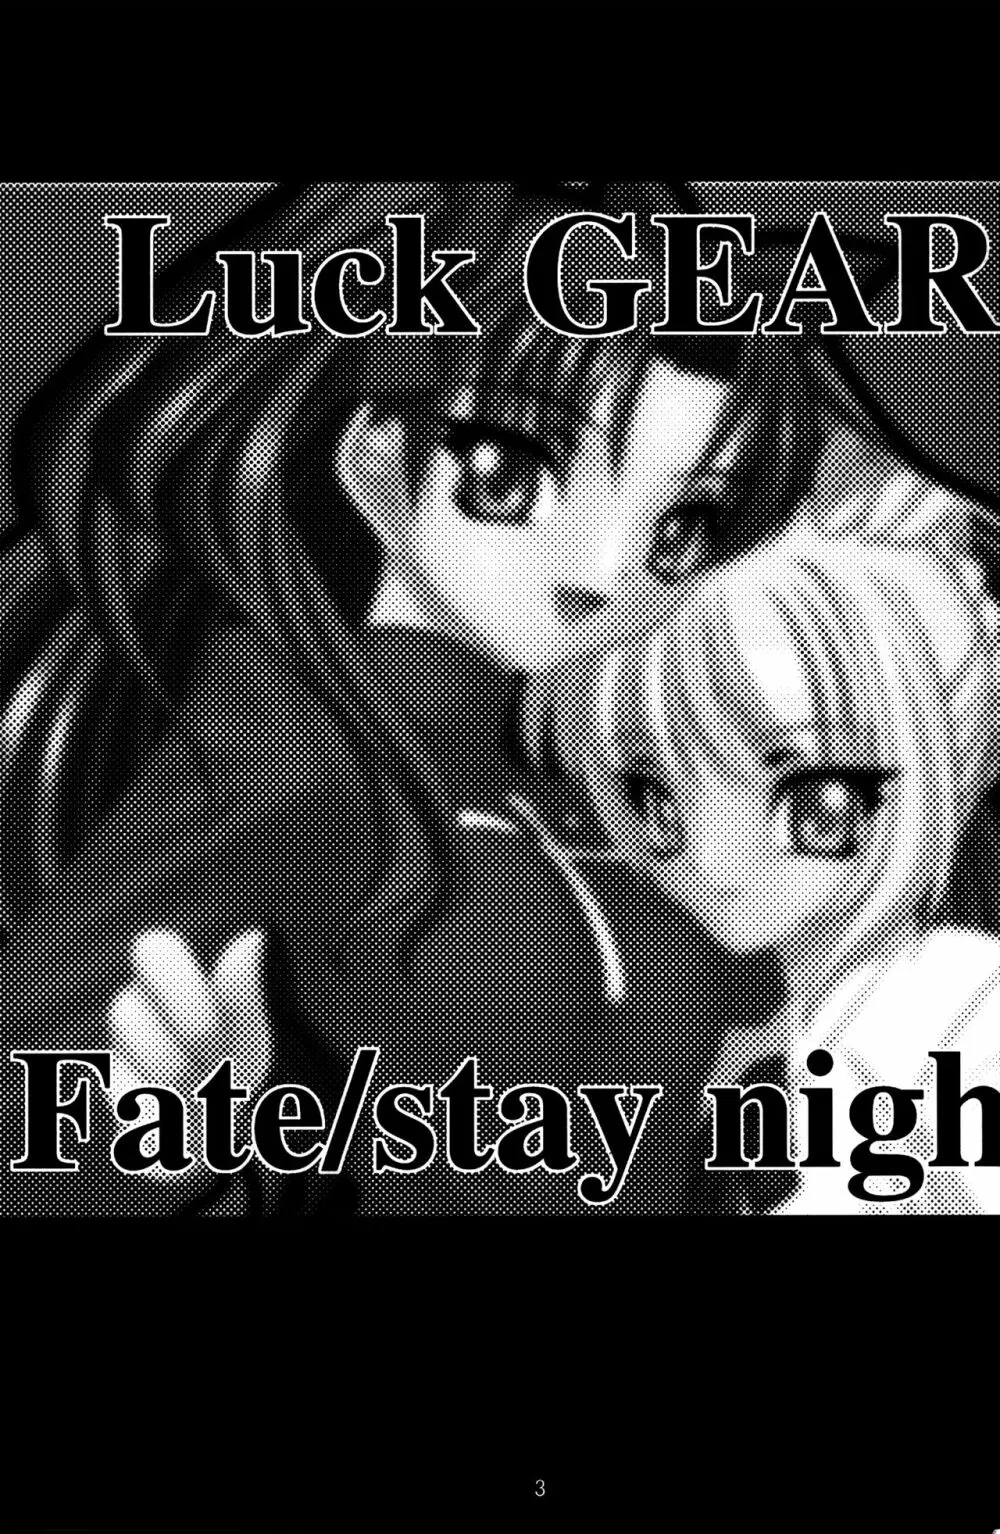 Fate/Luck GEAR material 2ページ